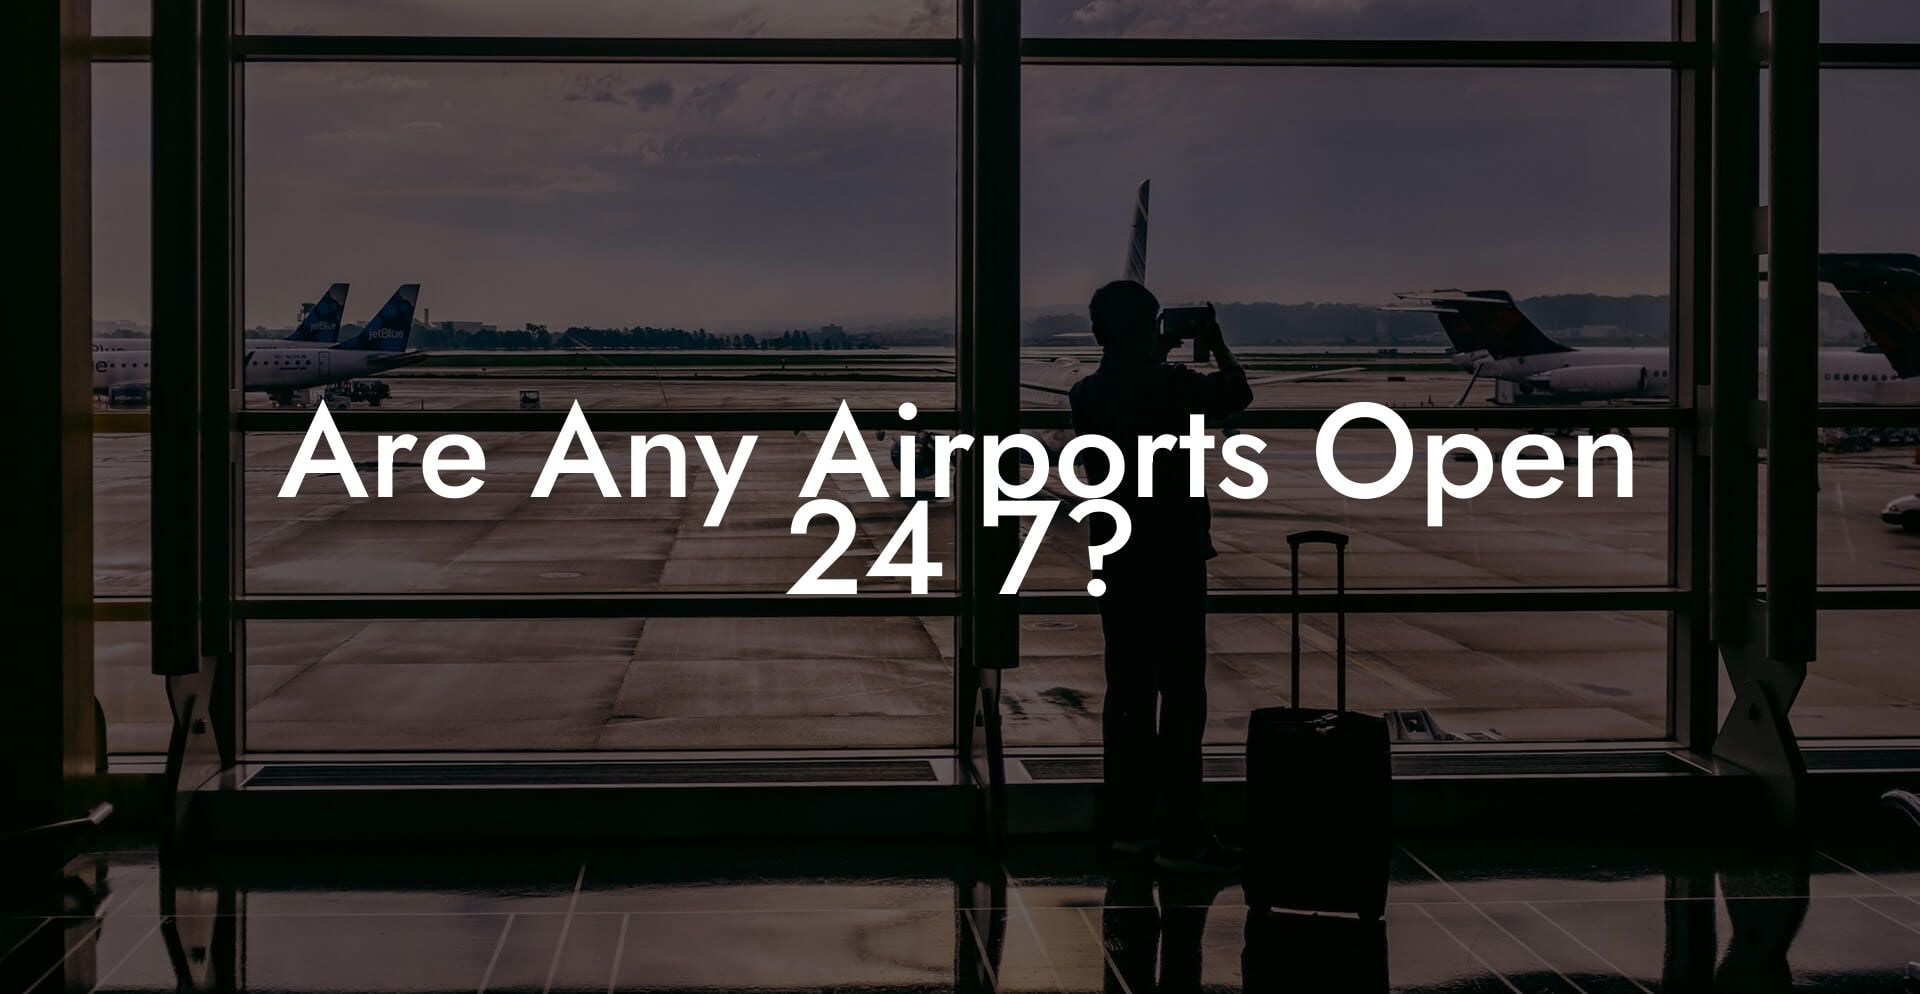 Are Any Airports Open 24 7?